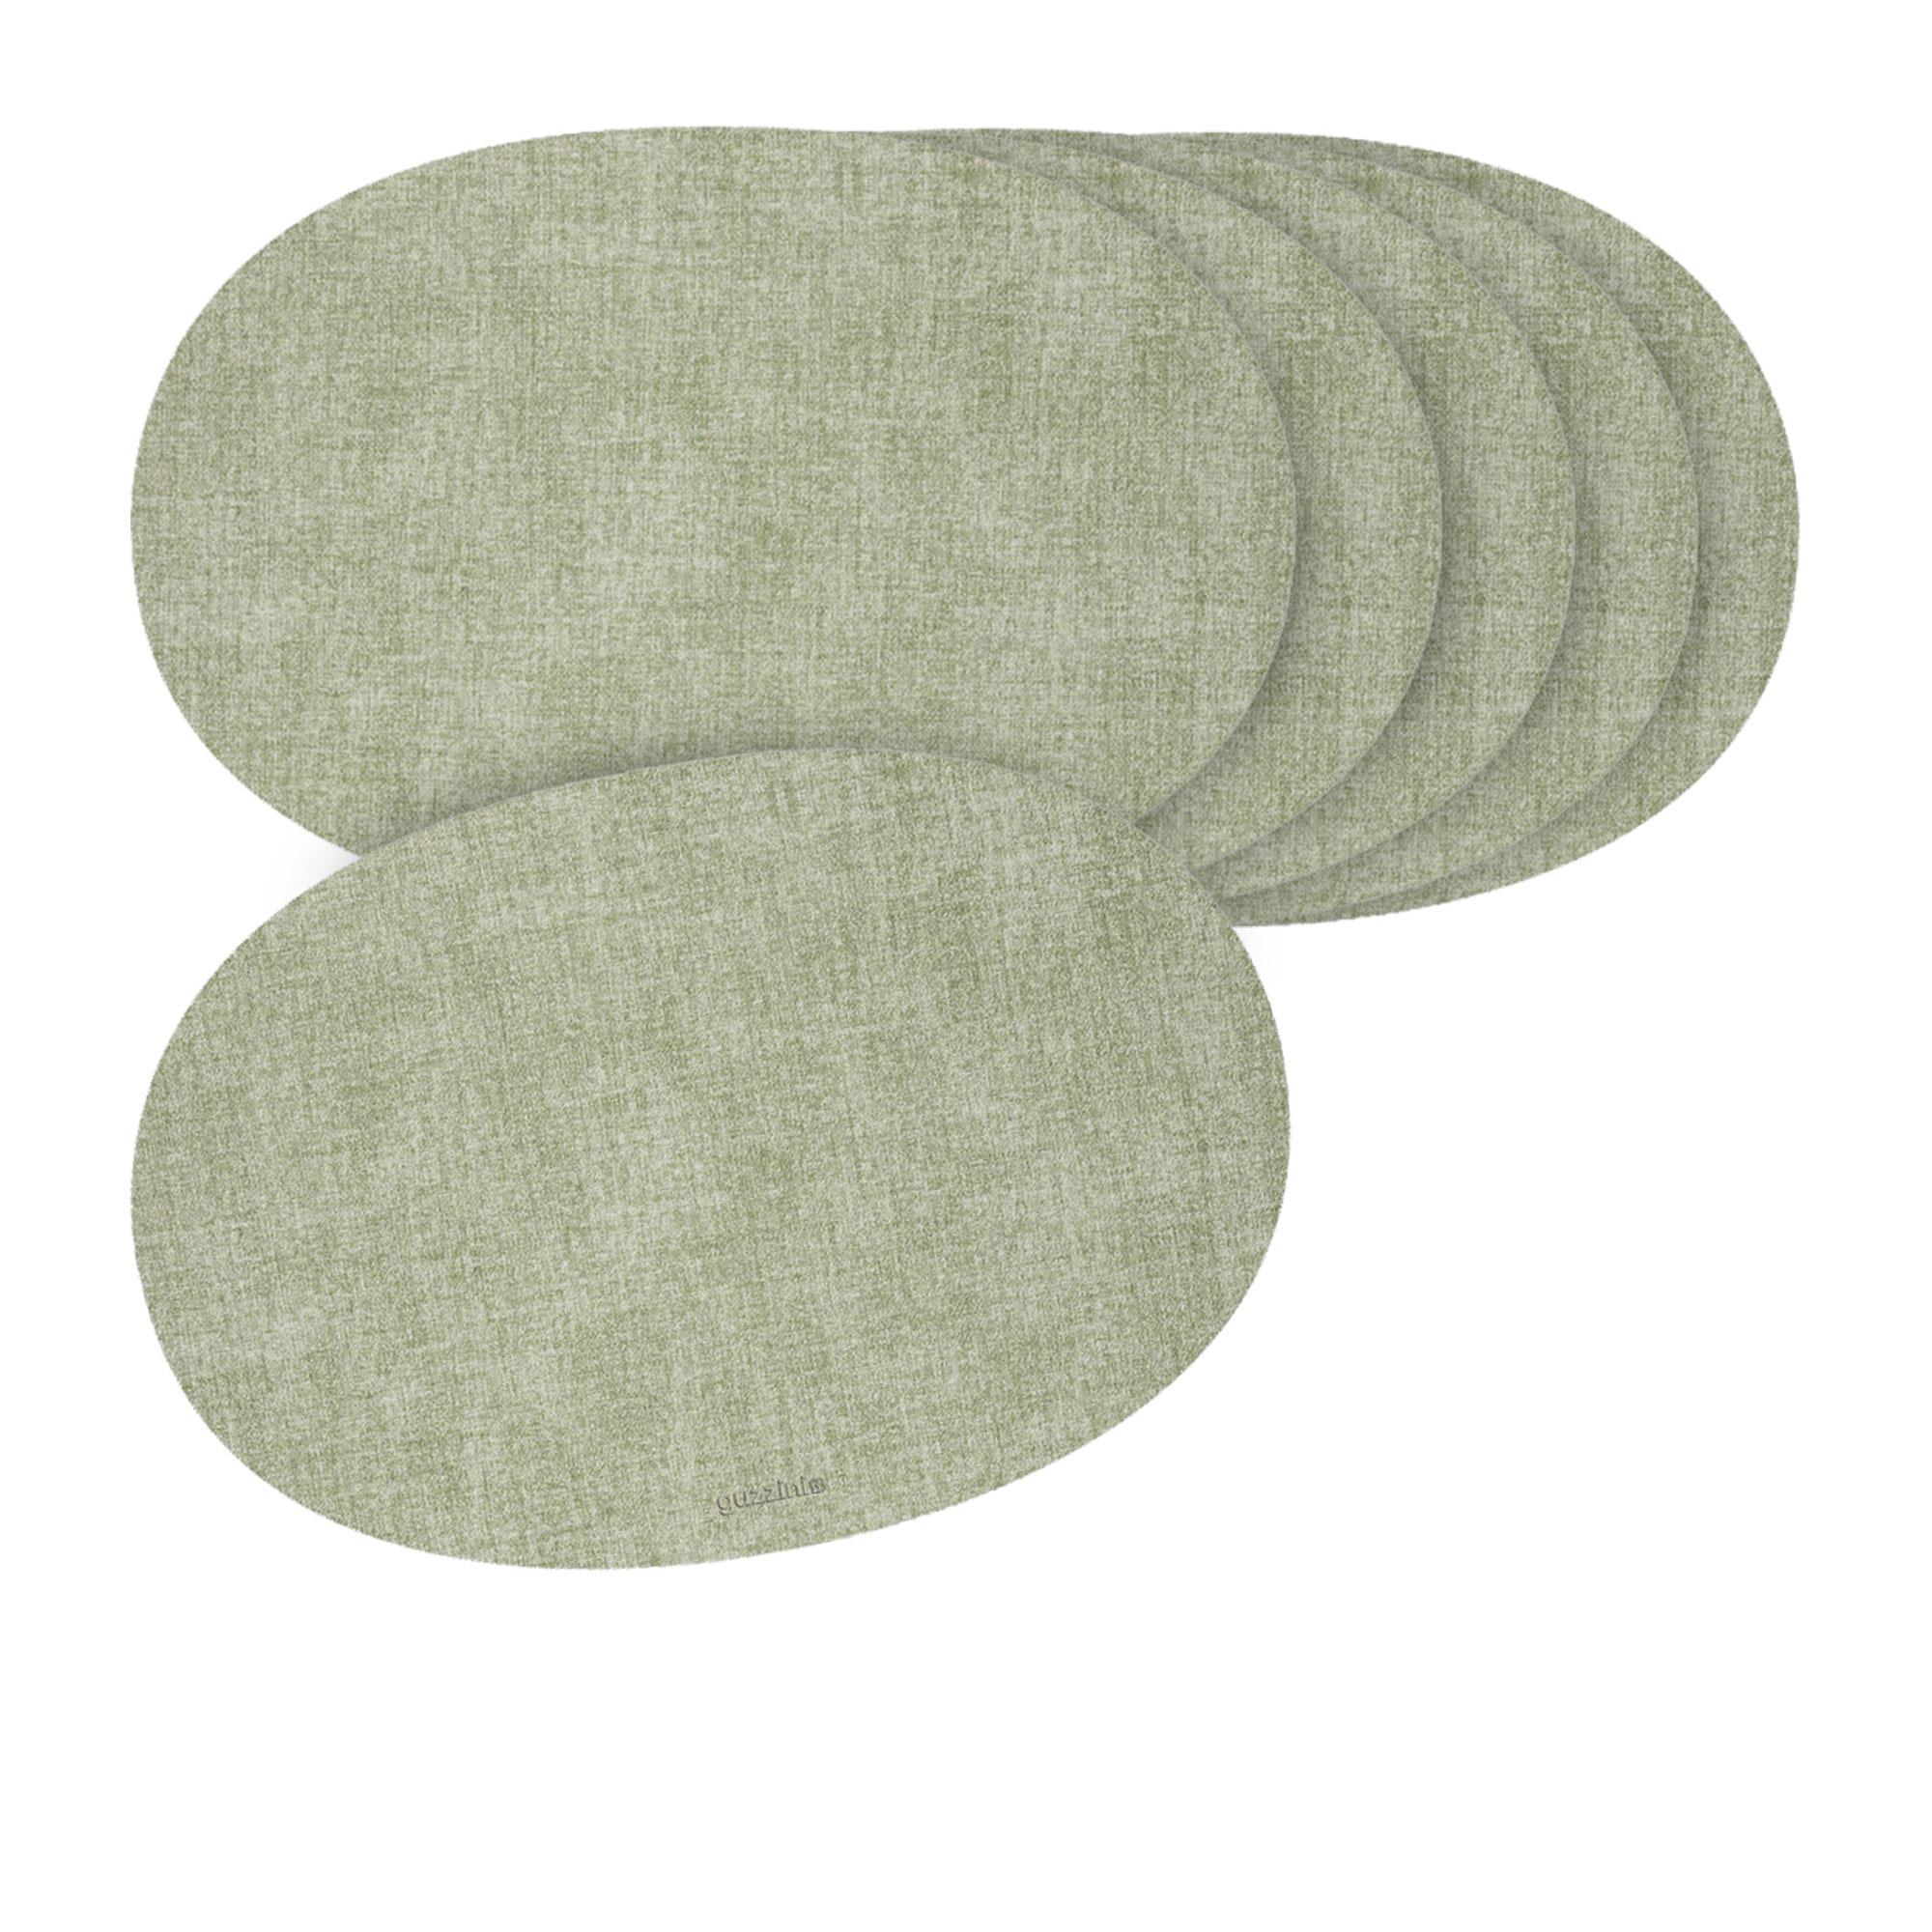 Guzzini Oval Placemat Set of 6 Mint Green Image 1